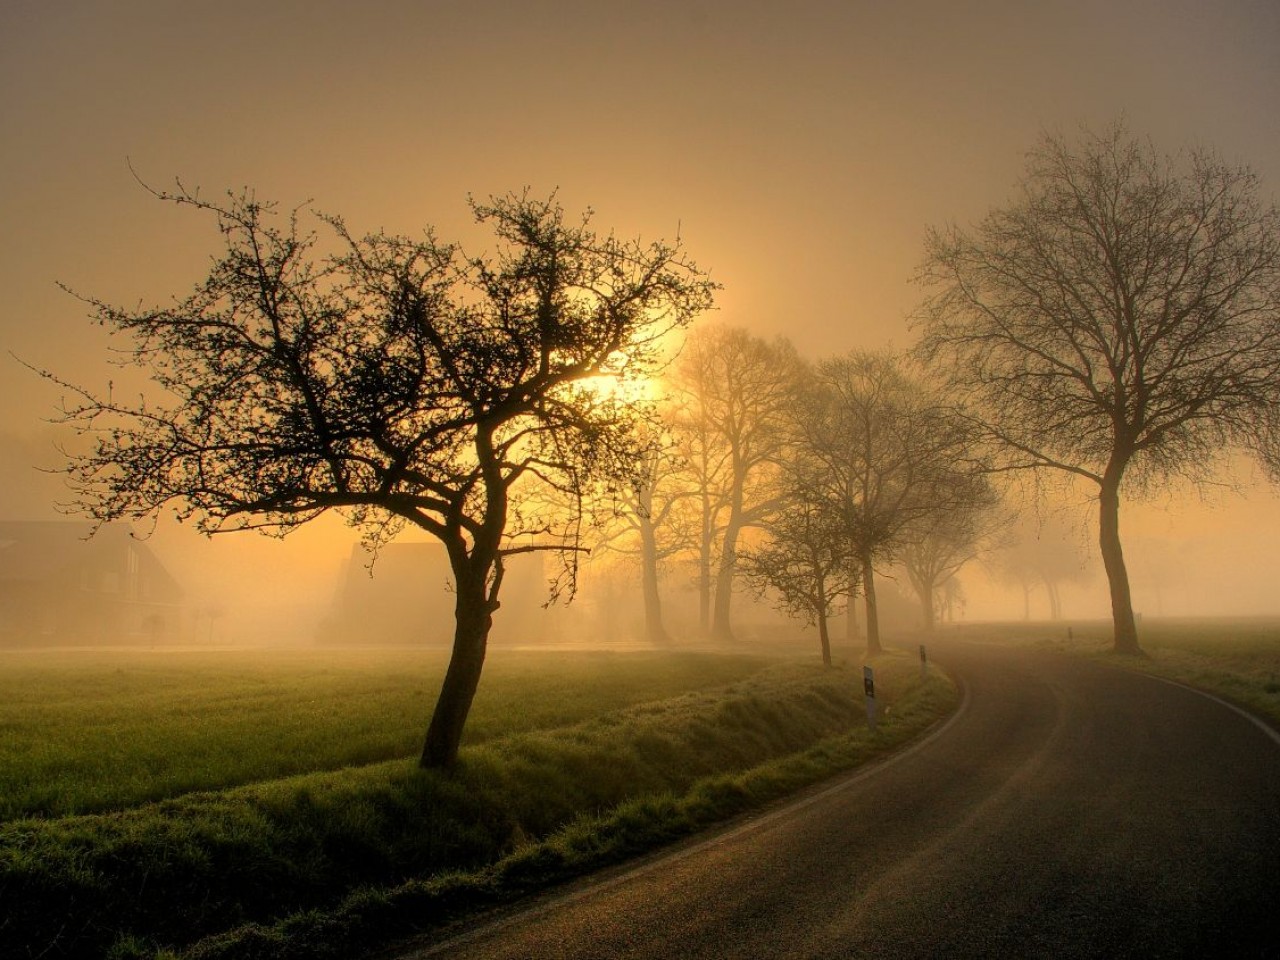 Sunrise Country Road Wallpaper Android